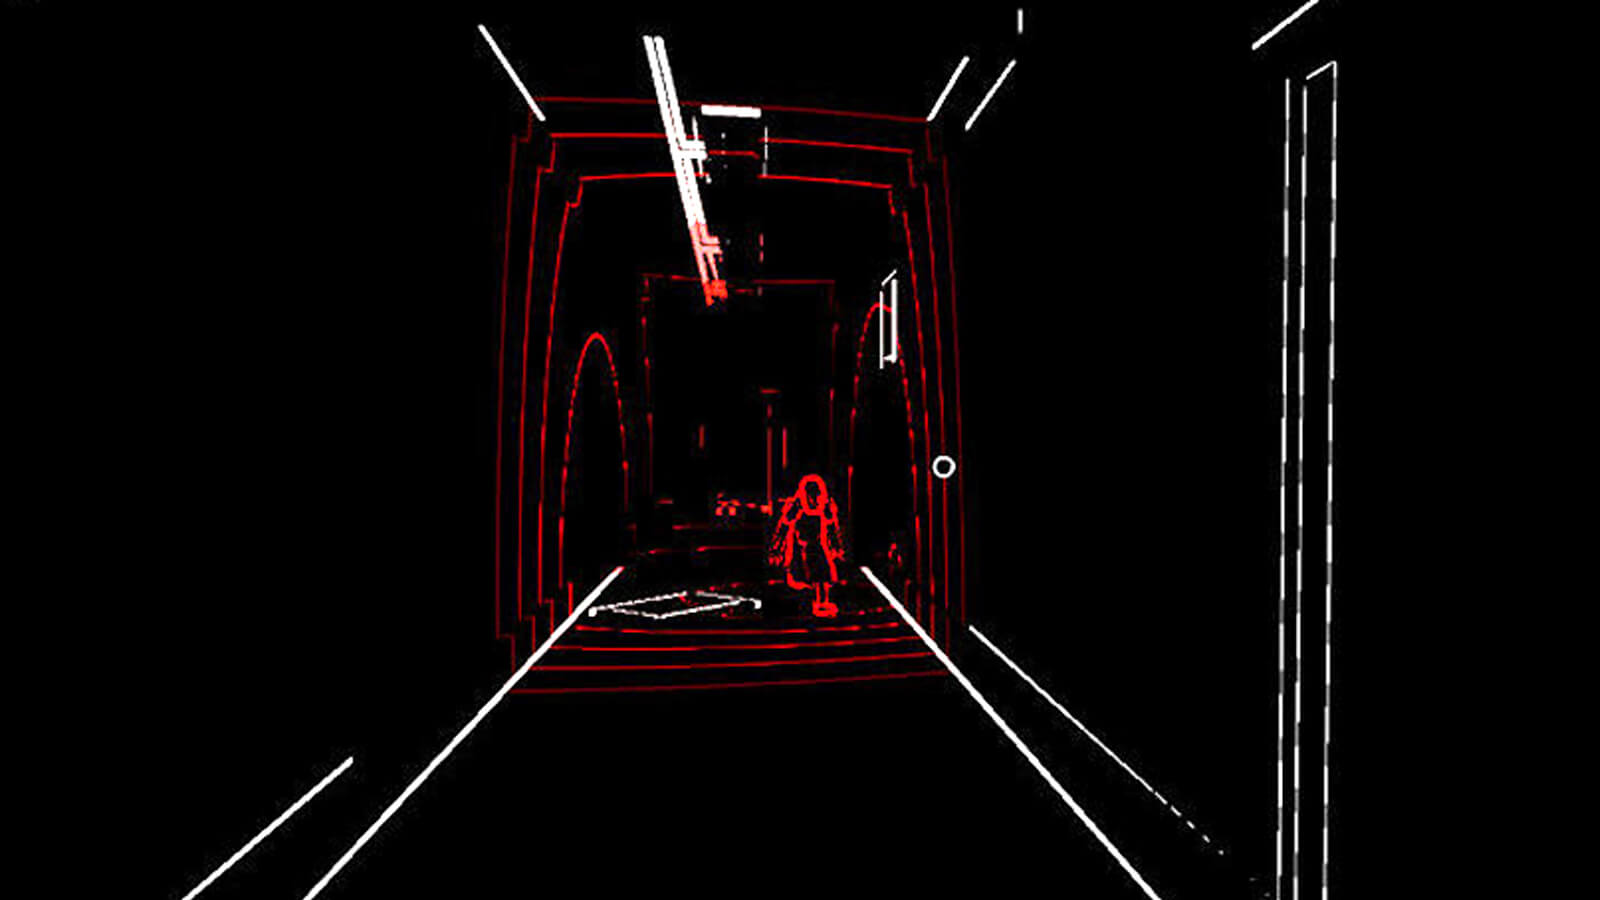 Seen in only black, red, and white relief, a crouching figure stalks the player